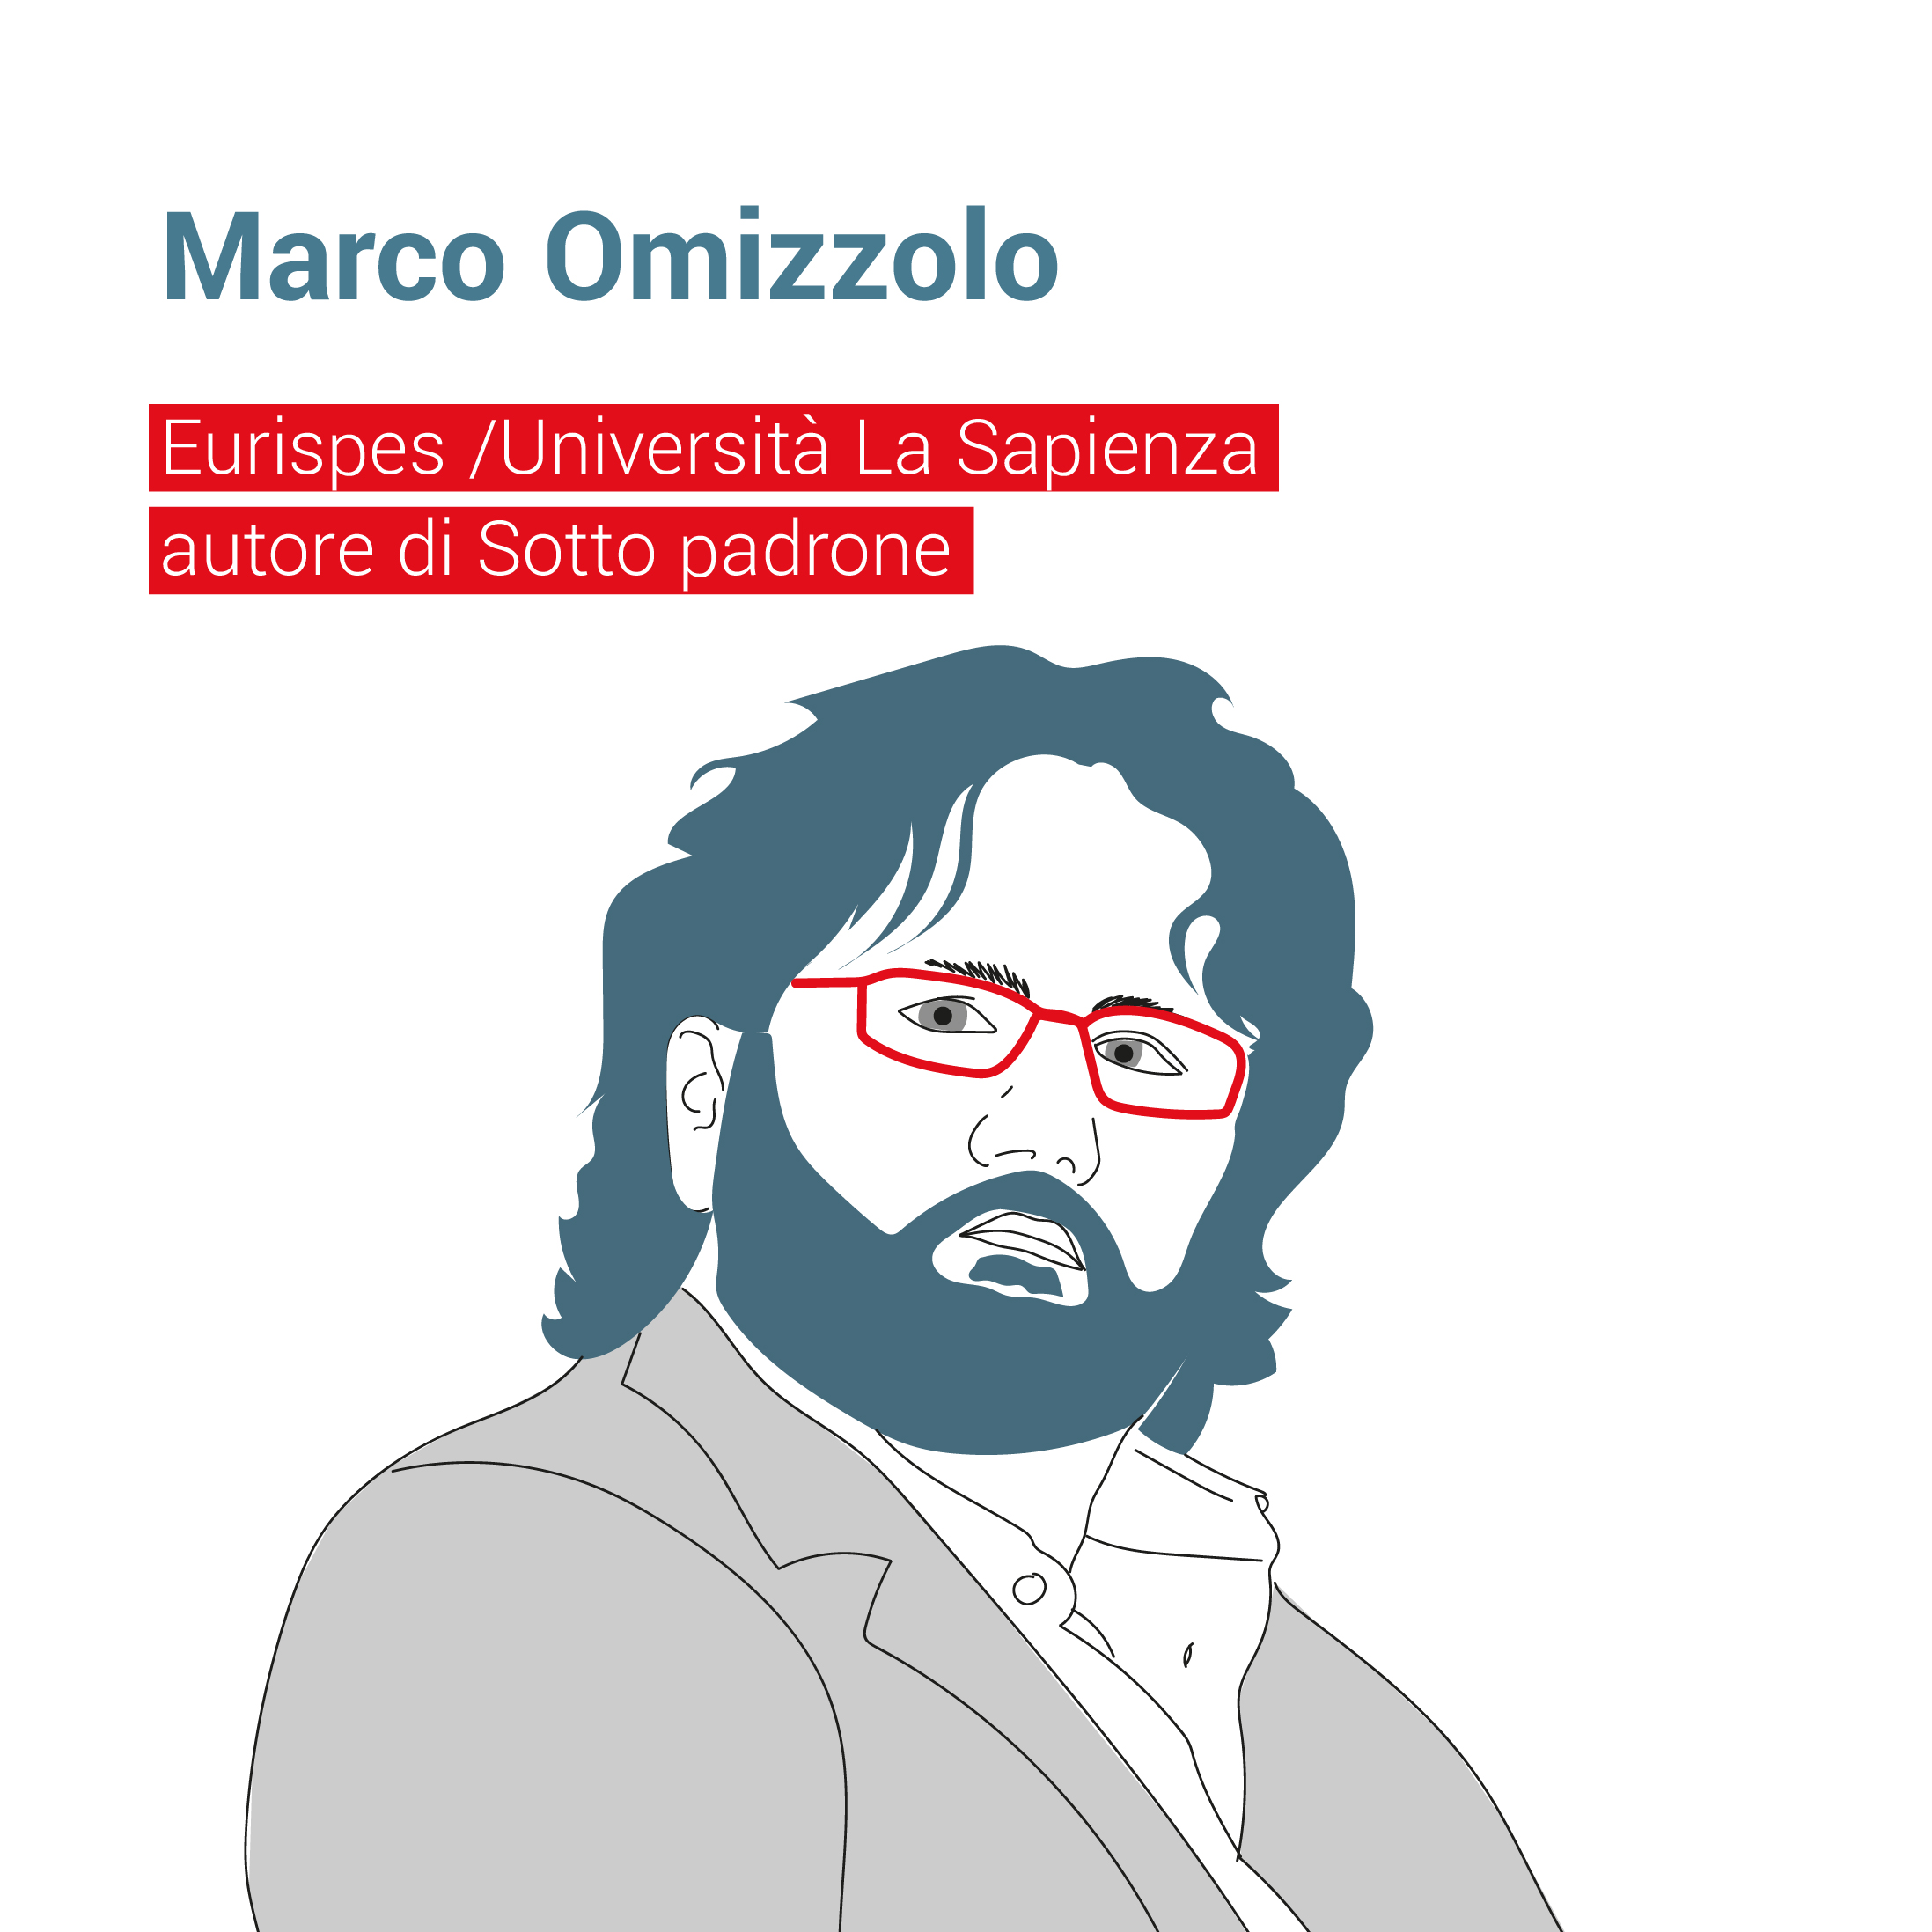 Marco Omizzolo